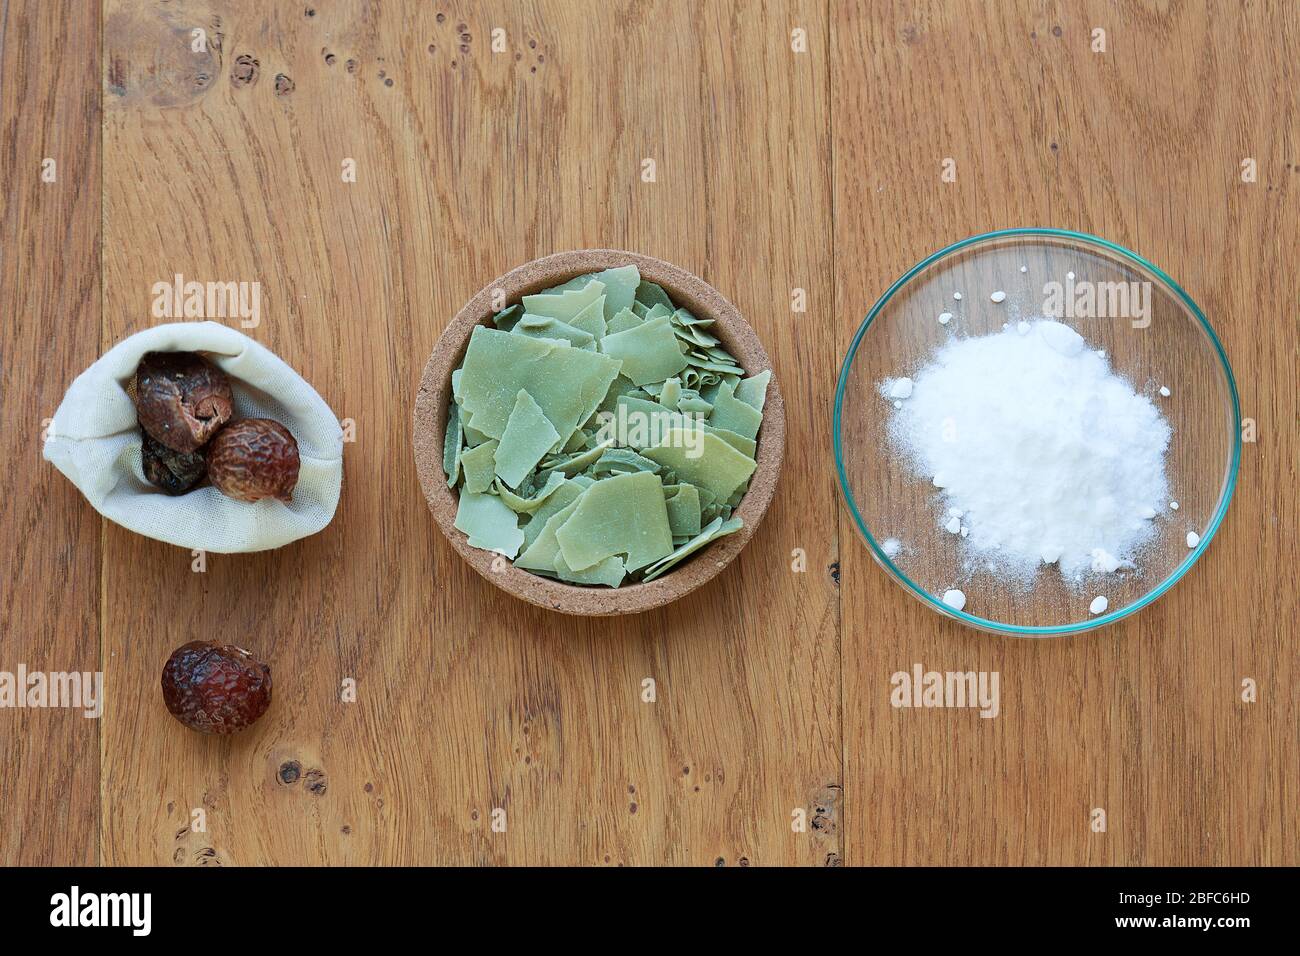 Flat lay overhead shot of Aleppo soap, baking soda and accessories for laundry like soapberries on a wooden background. Flat lay overhead shot of an A Stock Photo